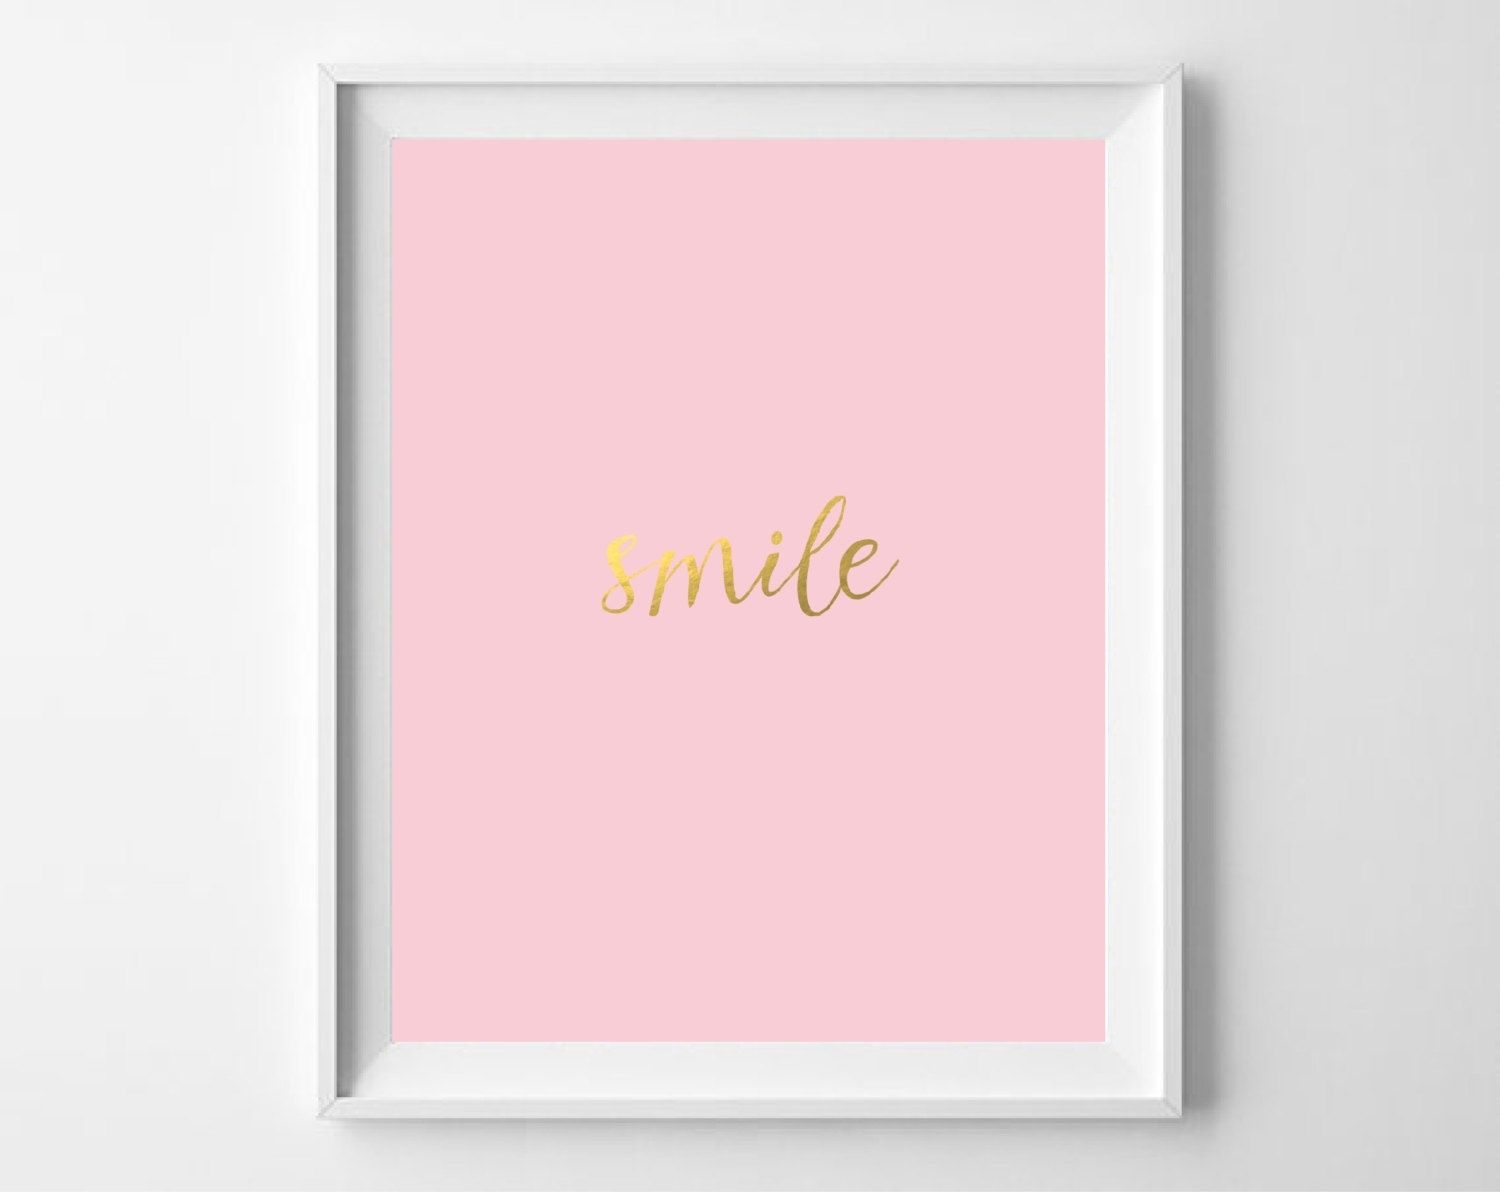 Smile Gold Foil Print Printable Blush Pink Gold Wall Art | Etsy With Regard To Gold Foil Wall Art (View 7 of 20)